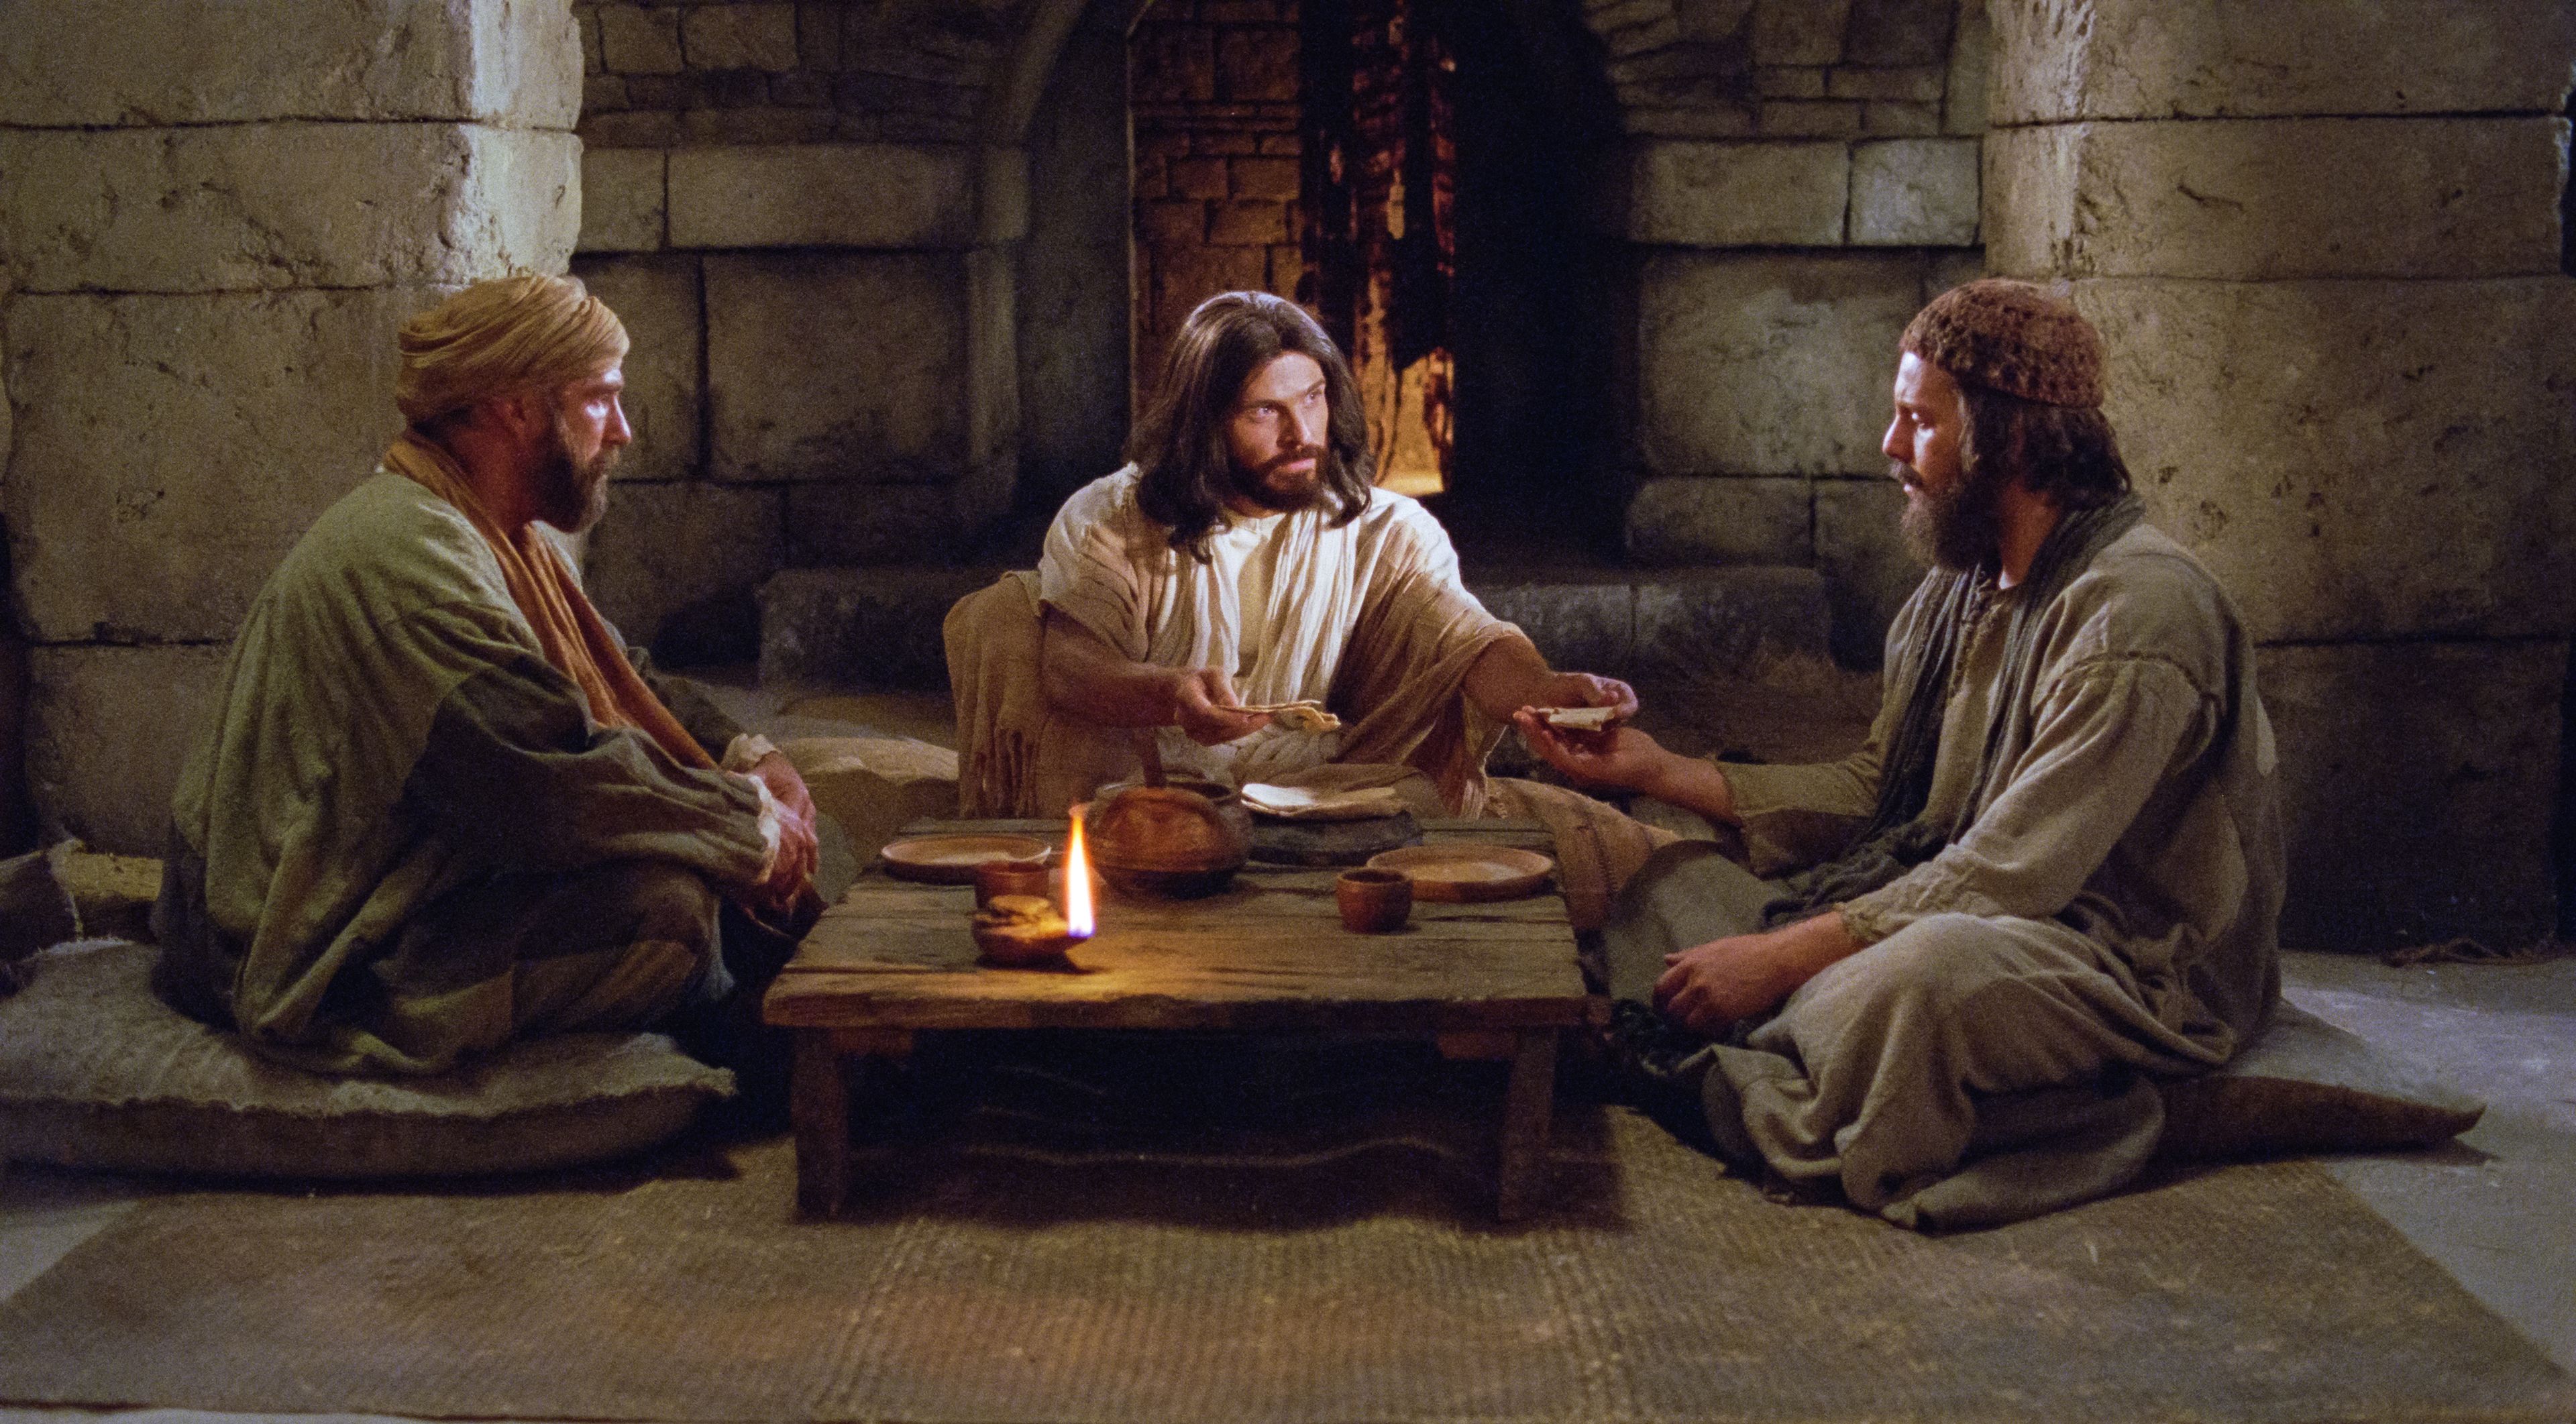 Christ communes with two disciples after having met them on the road to Emmaus.